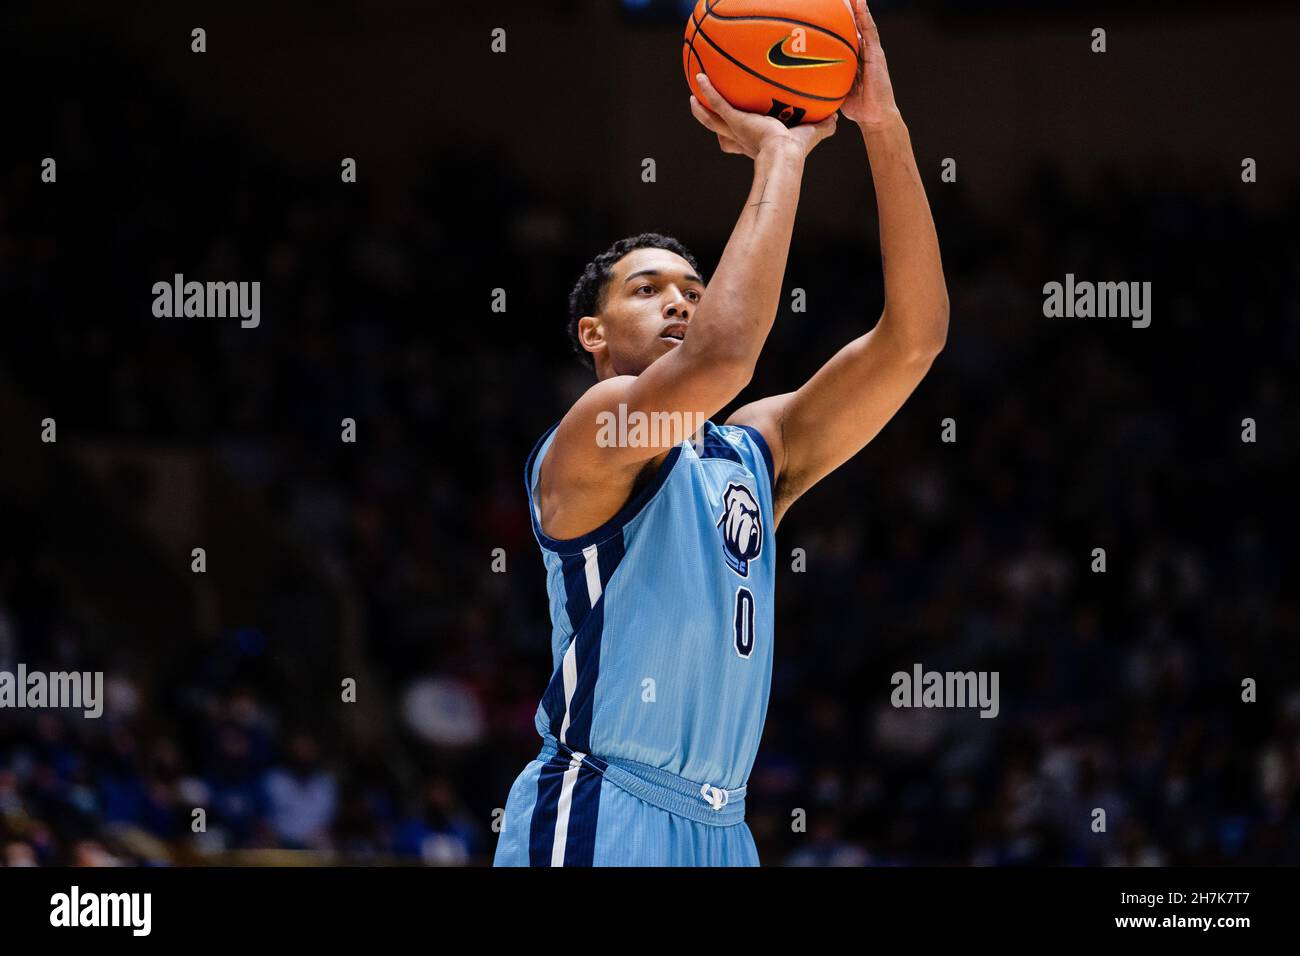 Durham, NC, USA. 22nd Nov, 2021. Citadel Bulldogs forward Jackson Price (0) shoots a three pointer against the Duke Blue Devils during the first half of the NCAA basketball matchup at Cameron Indoor in Durham, NC. (Scott Kinser/Cal Sport Media). Credit: csm/Alamy Live News Stock Photo